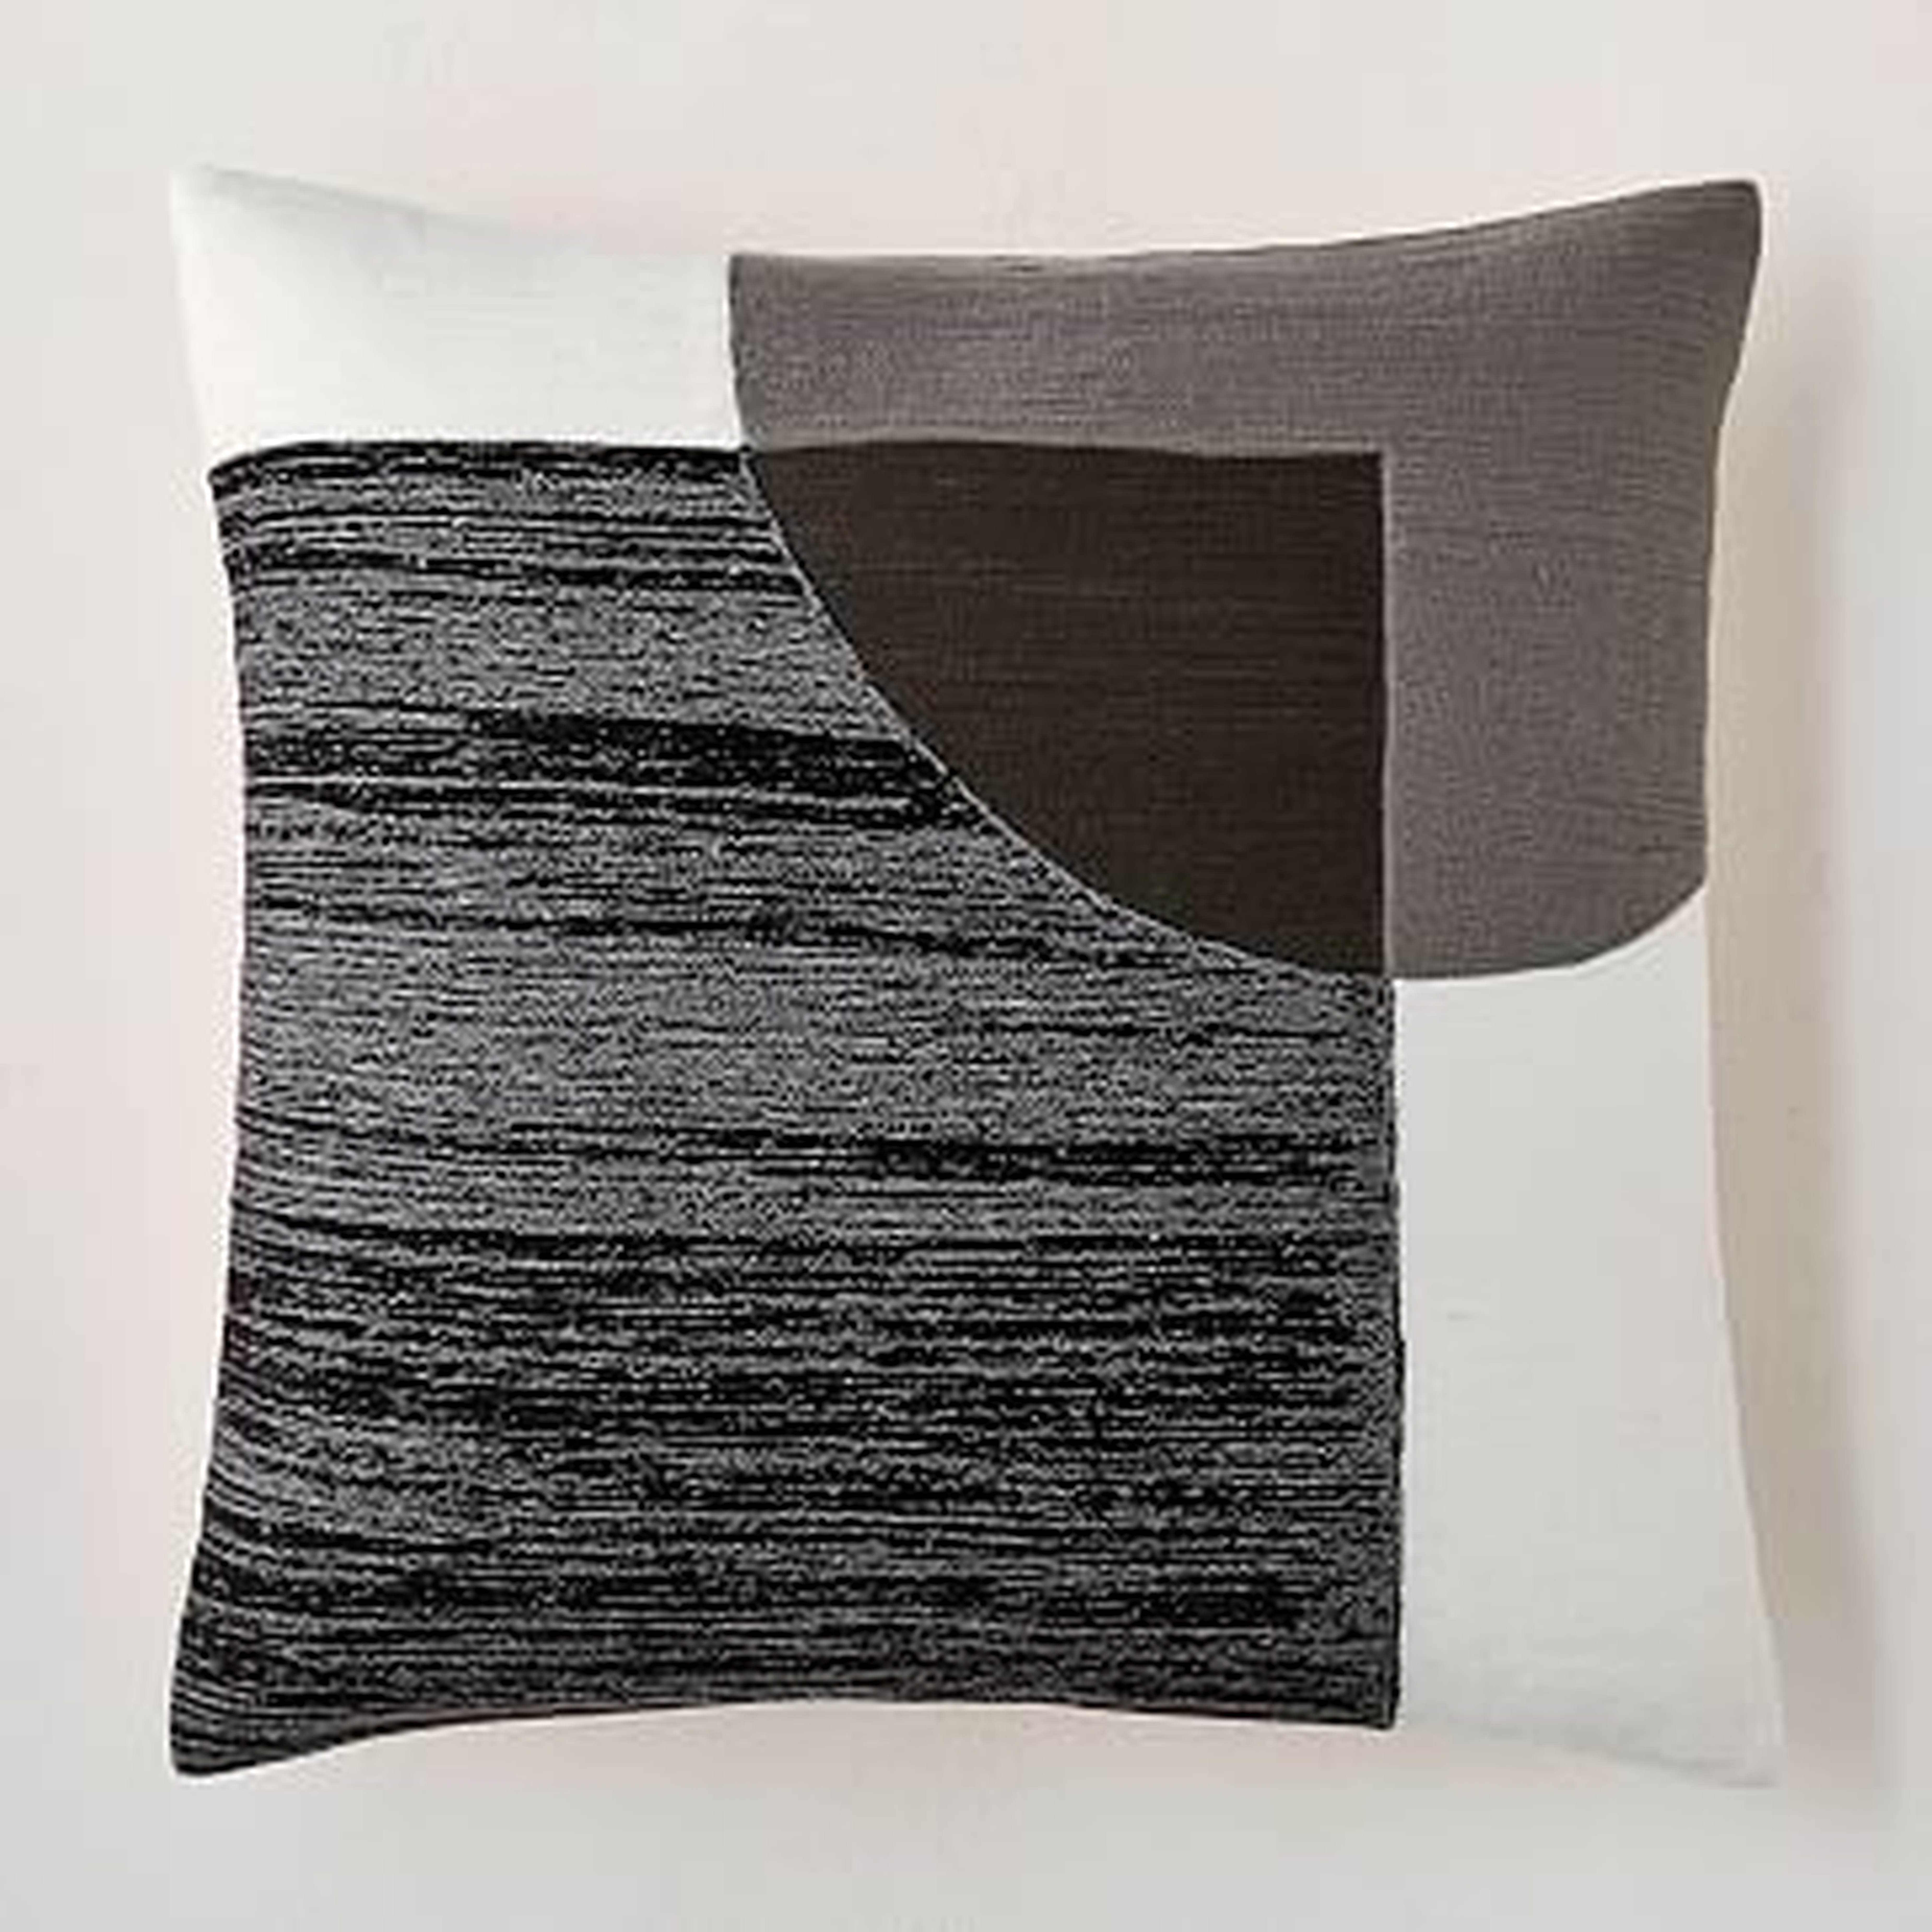 Crewel Overlapping Shapes Pillow Cover, 18"x18", Black - West Elm